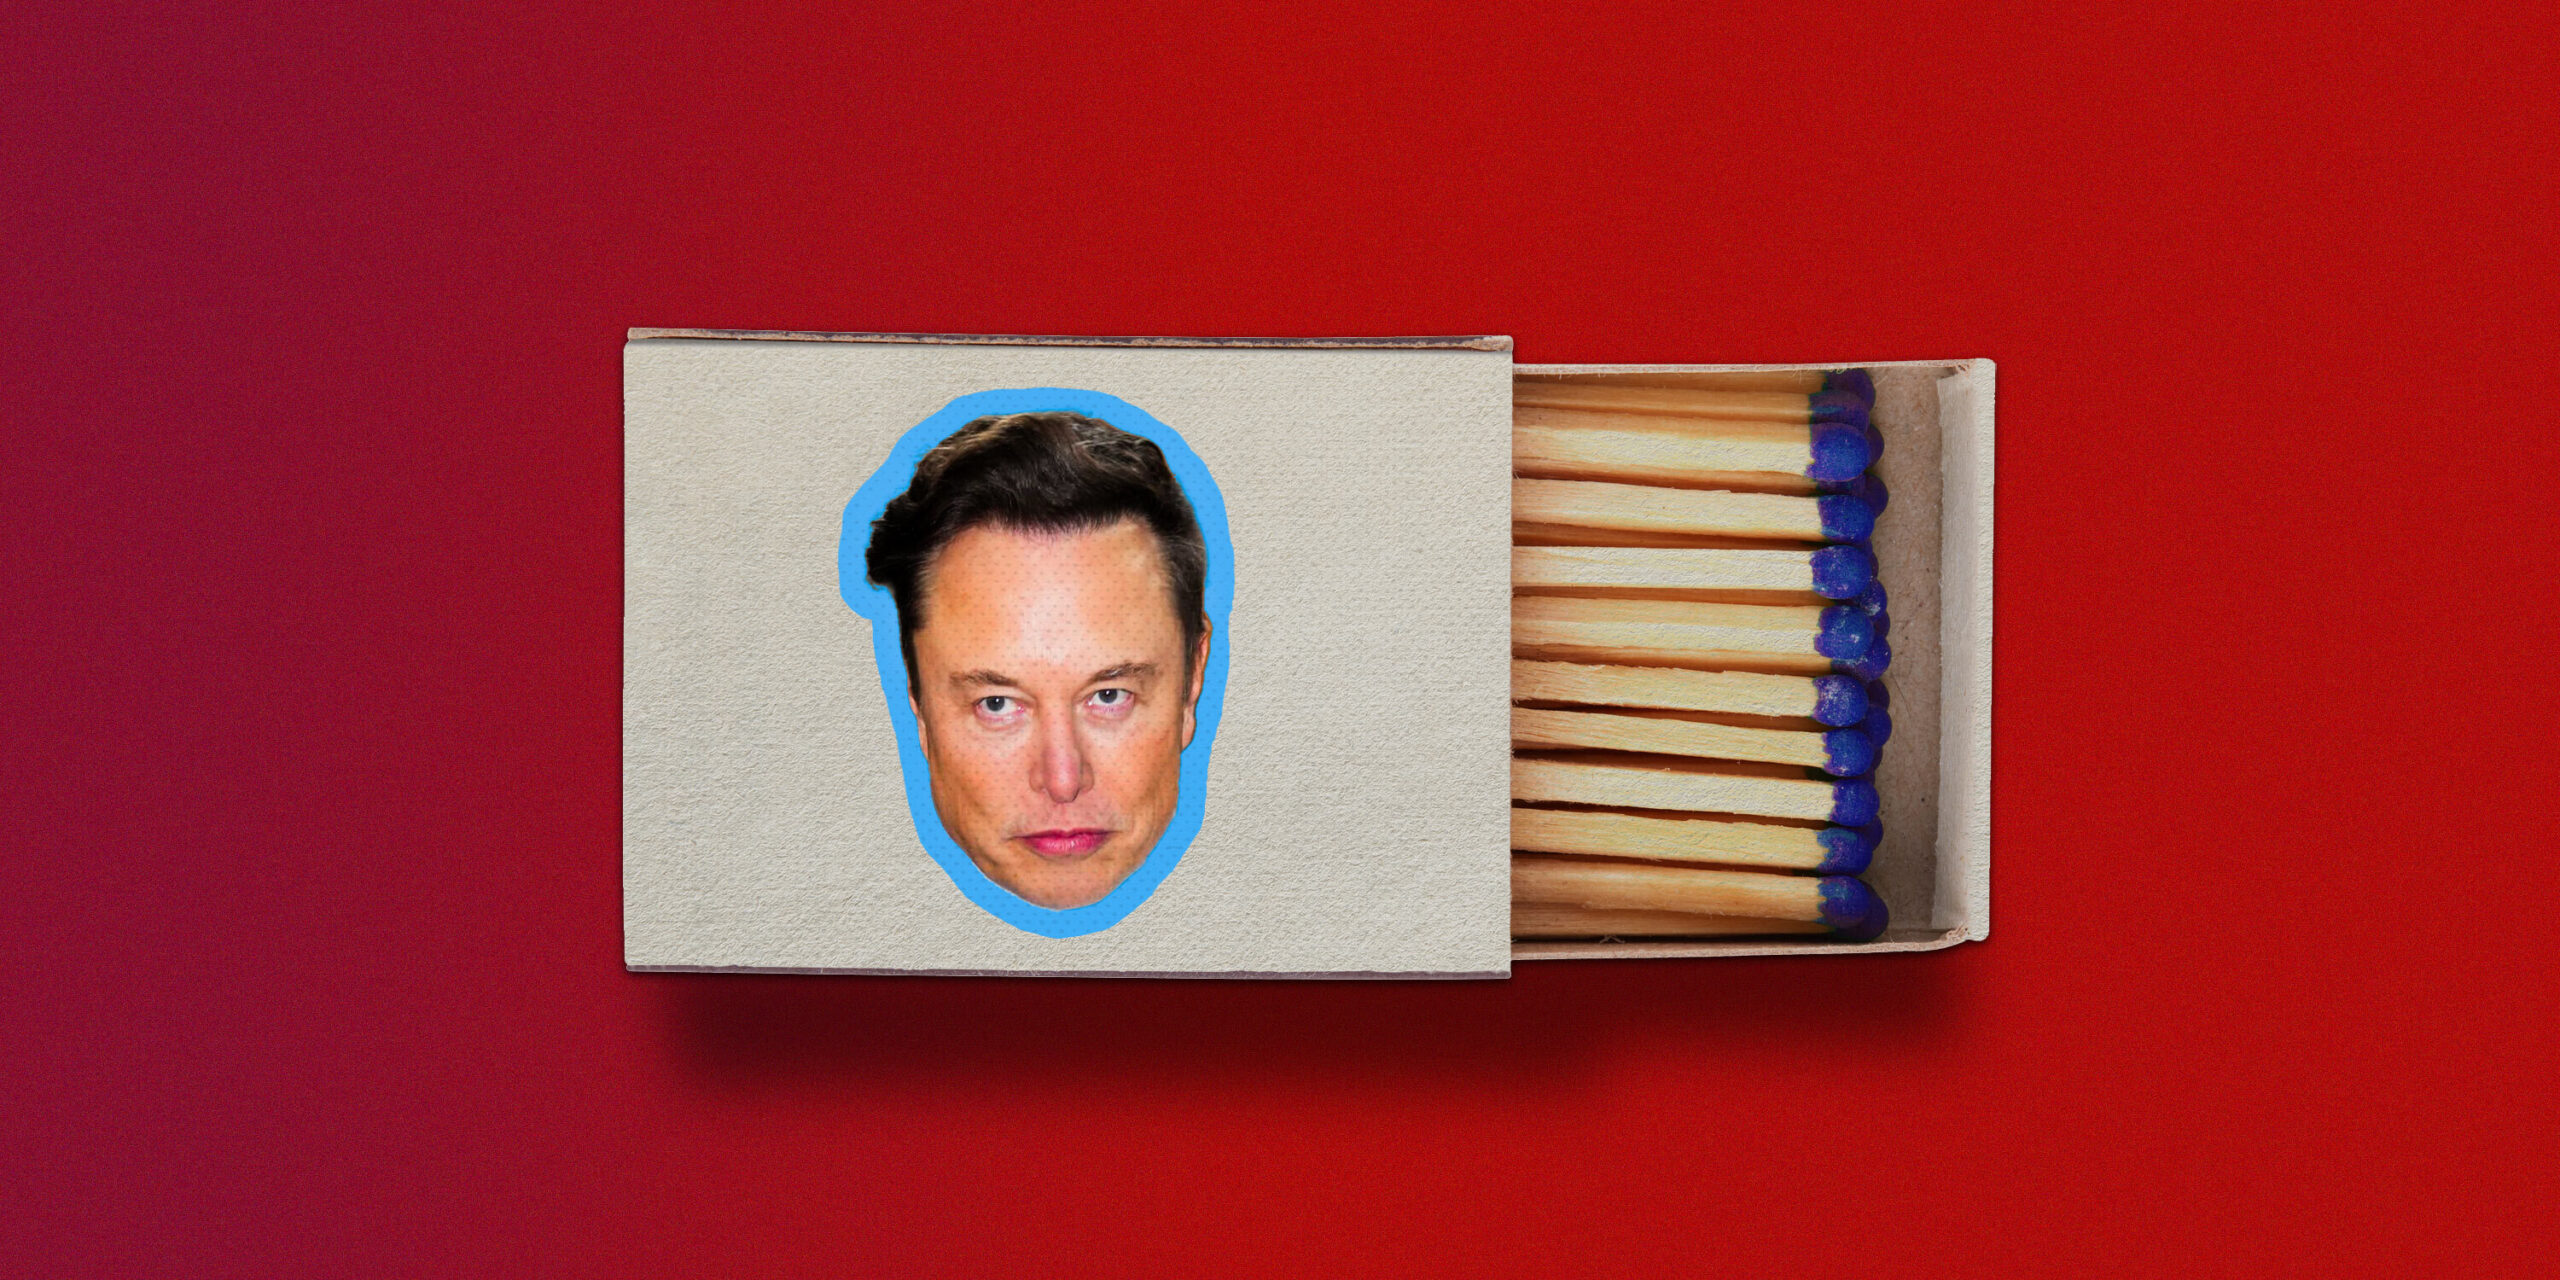 An open box of matches with dark blue tips, over a red background. On the front of the box is a photo of Elon Musk's face, outlined in Twitter blue.